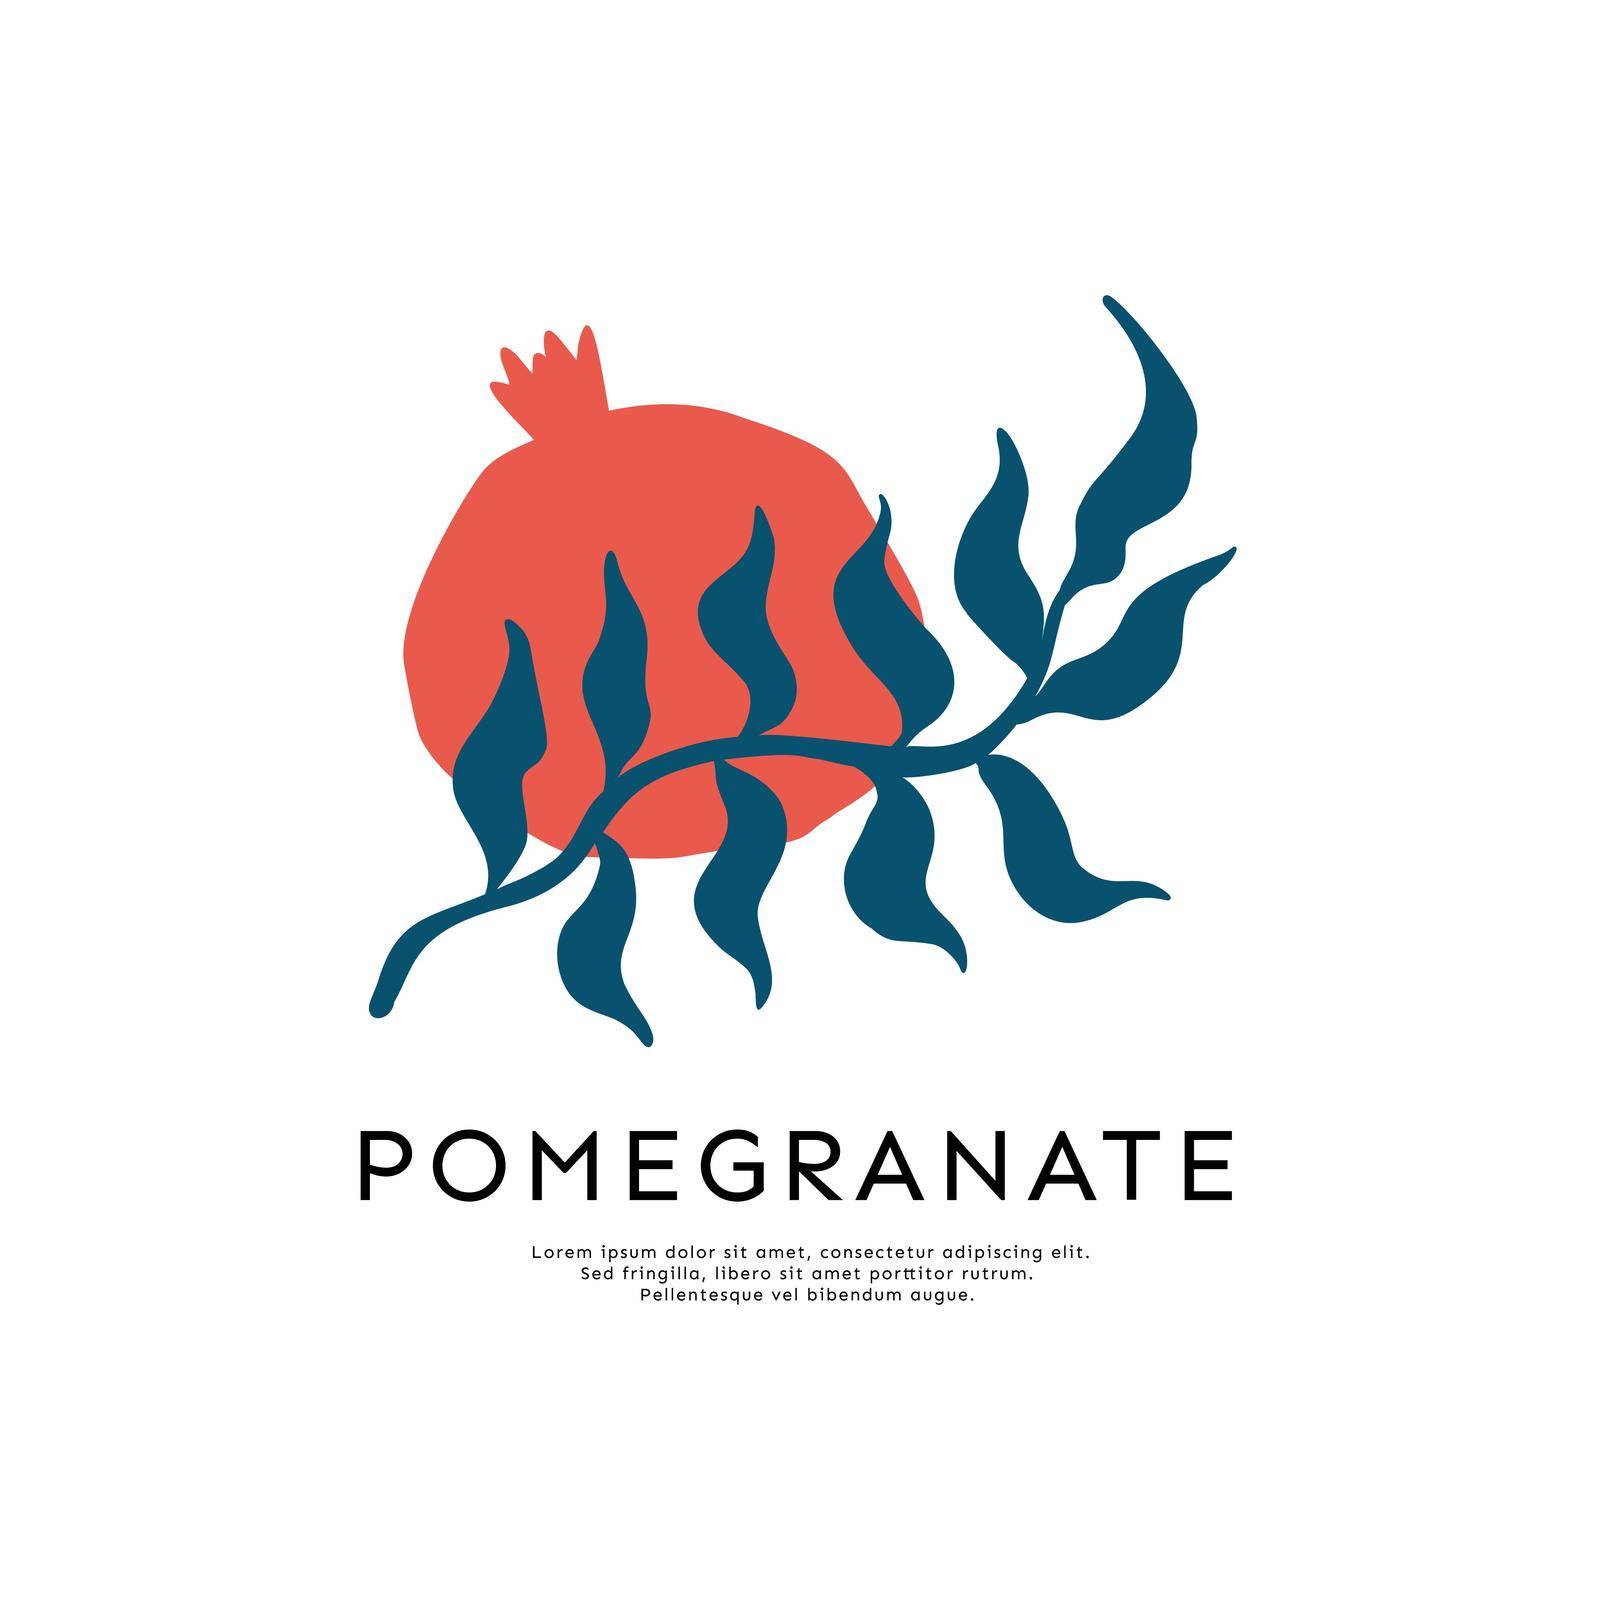 Pomegranate vector logo isolated on white background. Pomegranate and leaf for emblem, label for Shana tova design. Garnet and leaves with typography - logo design.